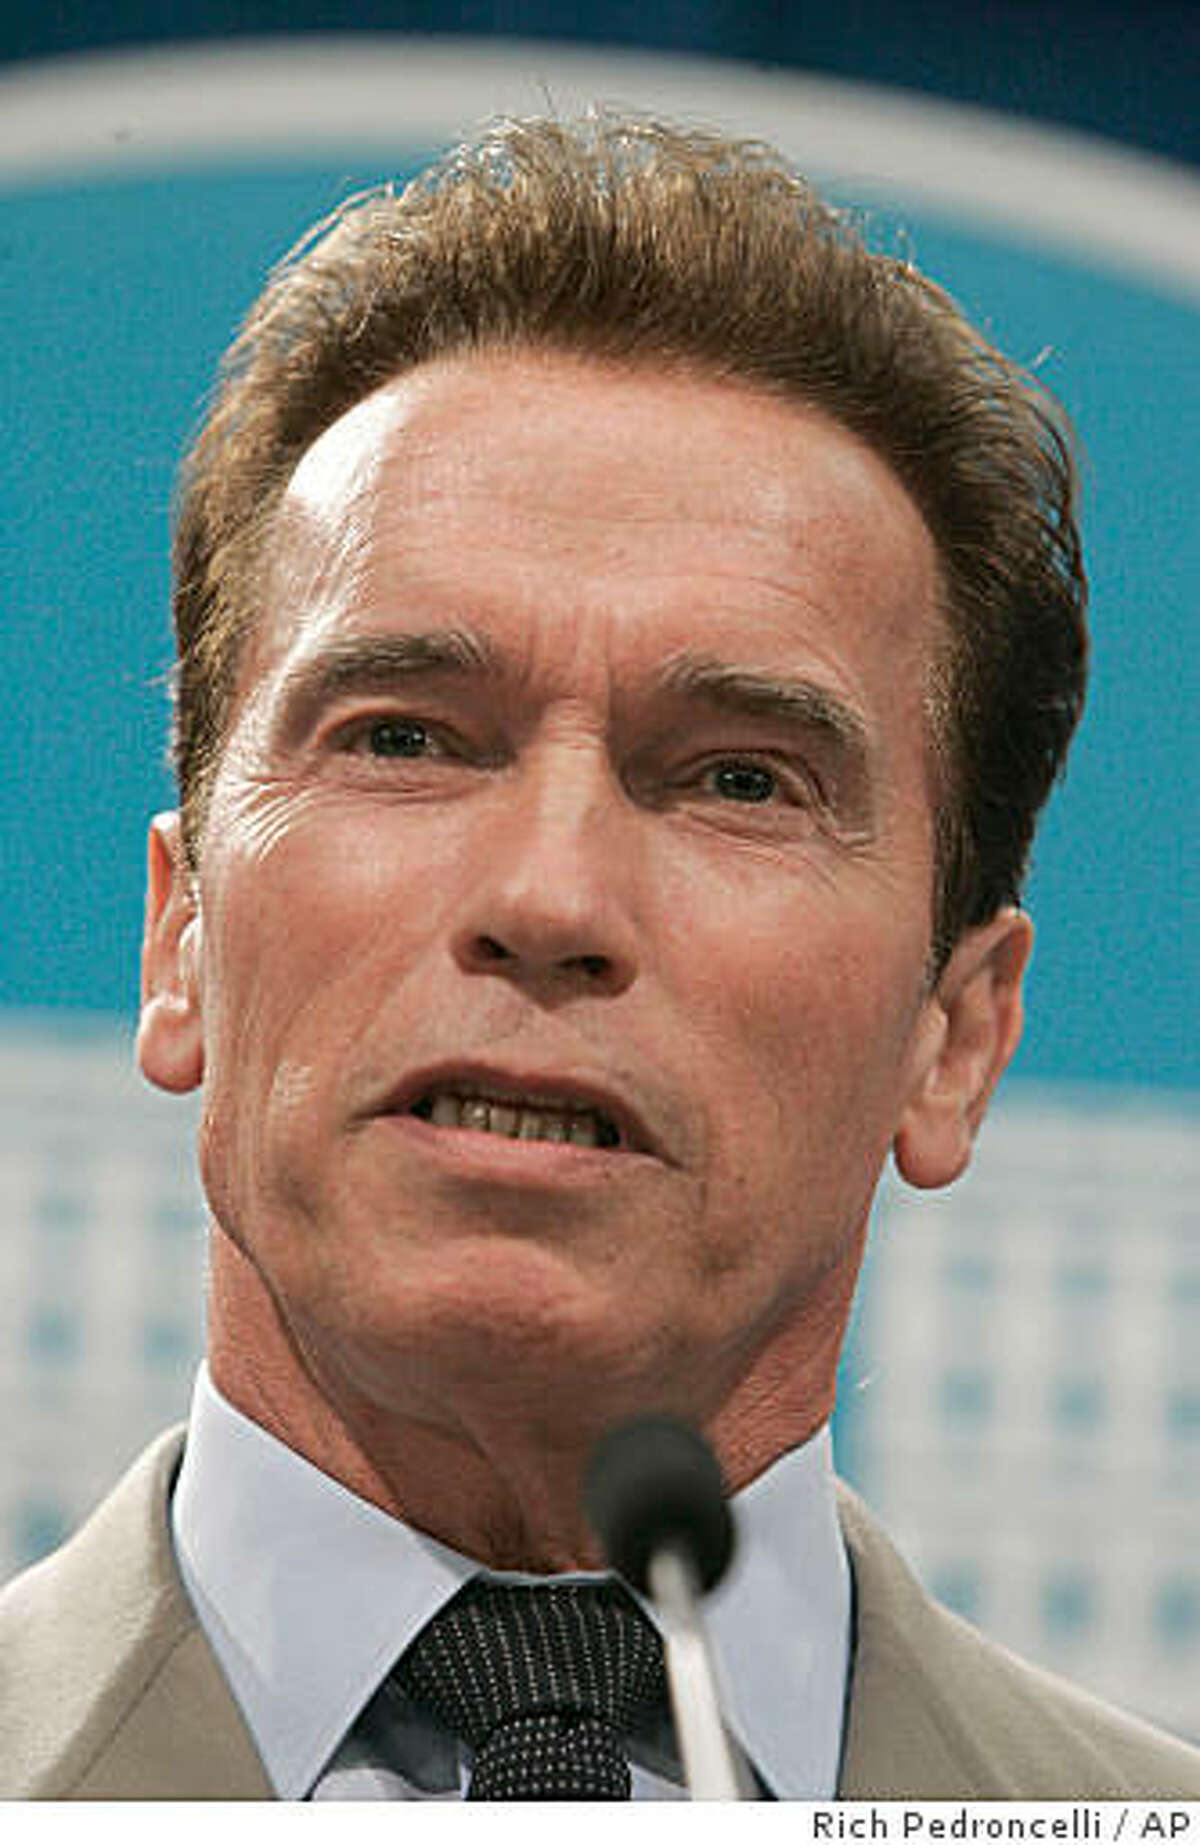 Gov. Arnold Schwarzenegger responds to a question concerning his proposed compromise state budget he unveiled during a Capitol news conference in Sacramento, Calif., Wednesday, Aug. 20, 2008. Schwarzenegger's plan calls for a temporary 1 percent sales tax increase and additional spending cuts to close the $15.2 billion deficit.(AP Photo/Rich Pedroncelli)